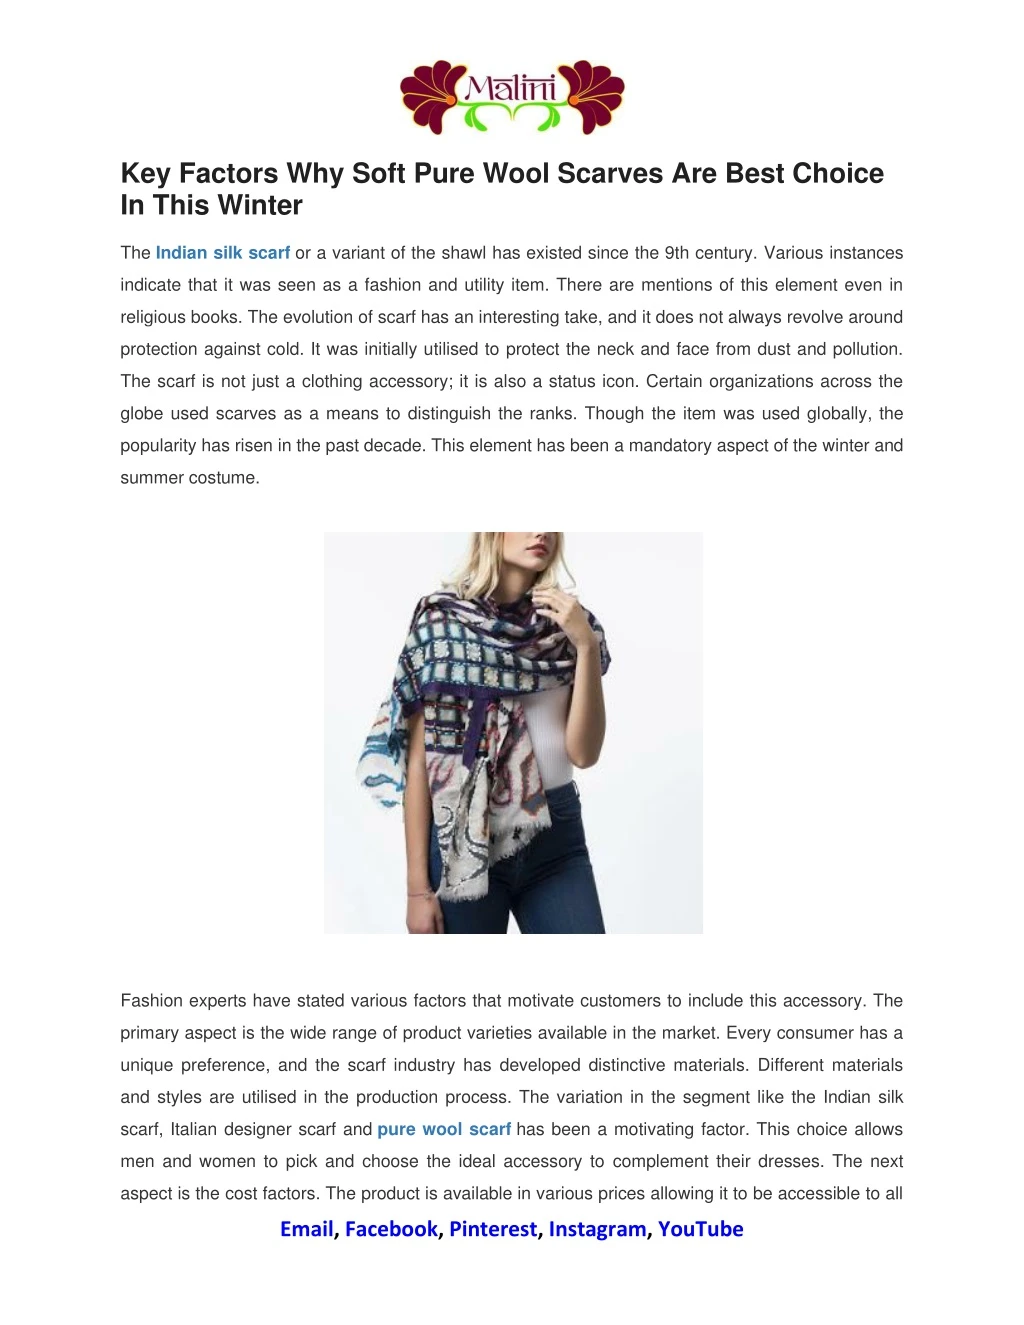 key factors why soft pure wool scarves are best